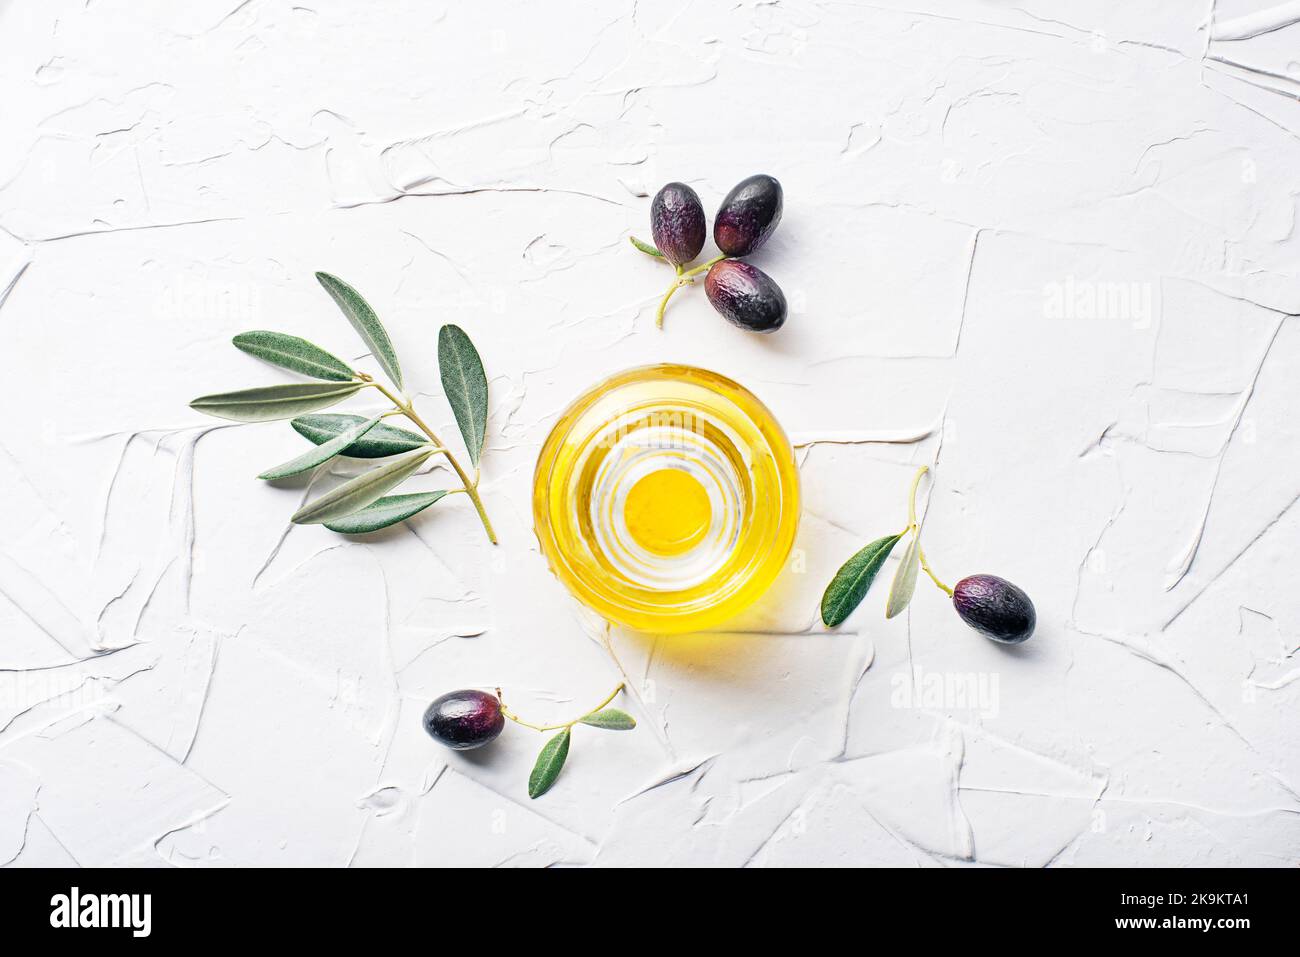 Olive oil olives and olive branch on white background Stock Photo